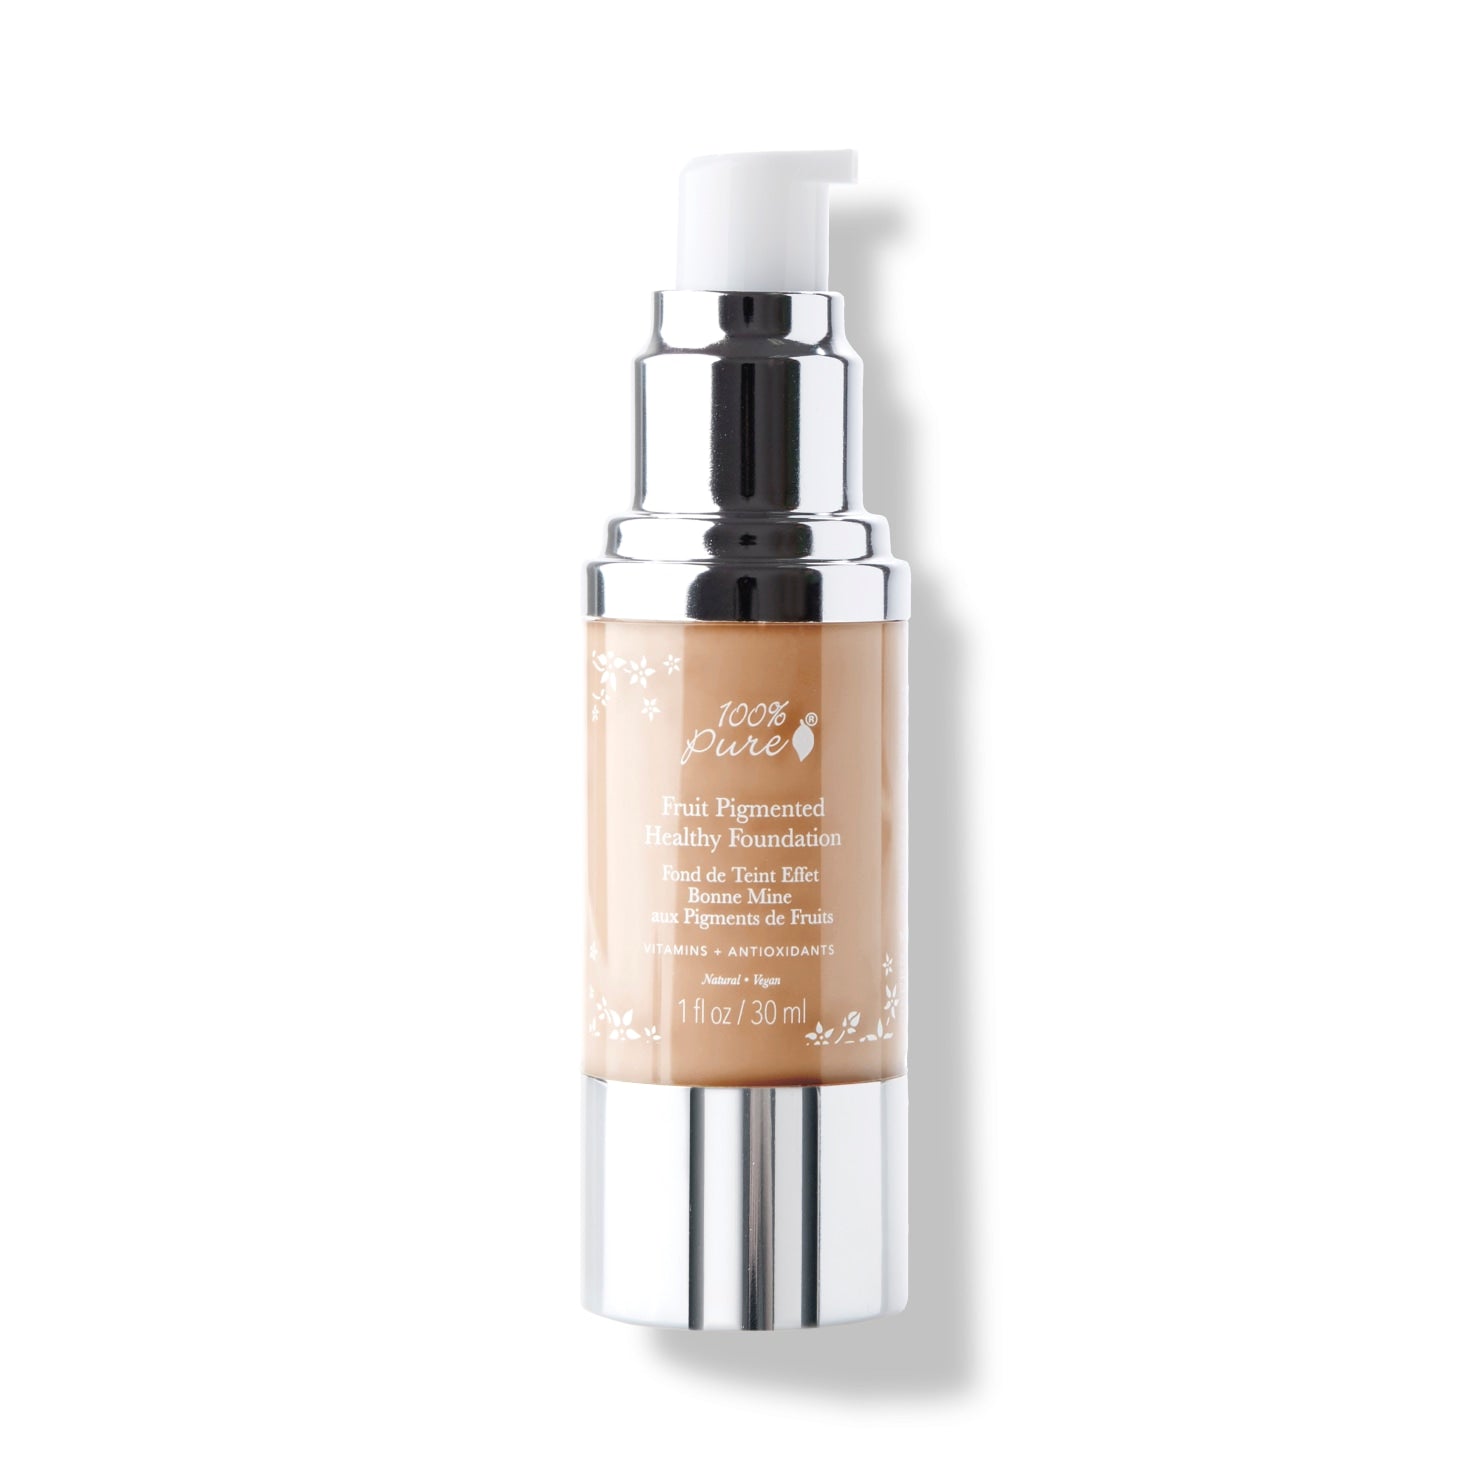 100% PURE® Fruit Pigmented® Healthy Foundation, Golden Peach